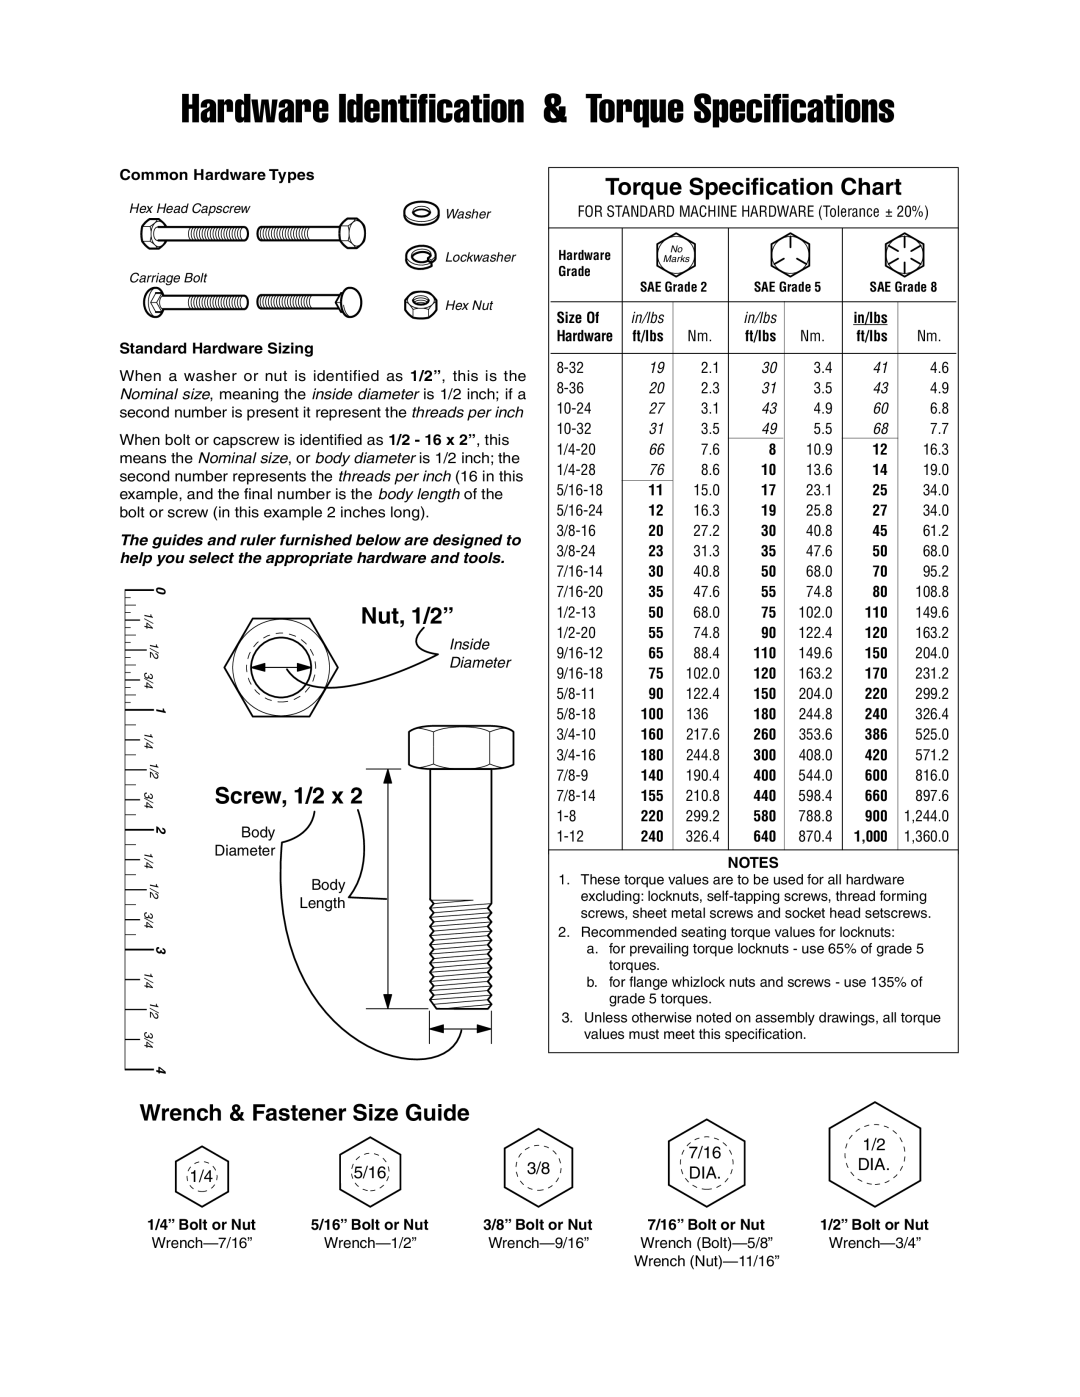 Snapper 3901 Wrench & Fastener Size Guide, Hardware Identification & Torque Specifications, Torque Specification Chart 